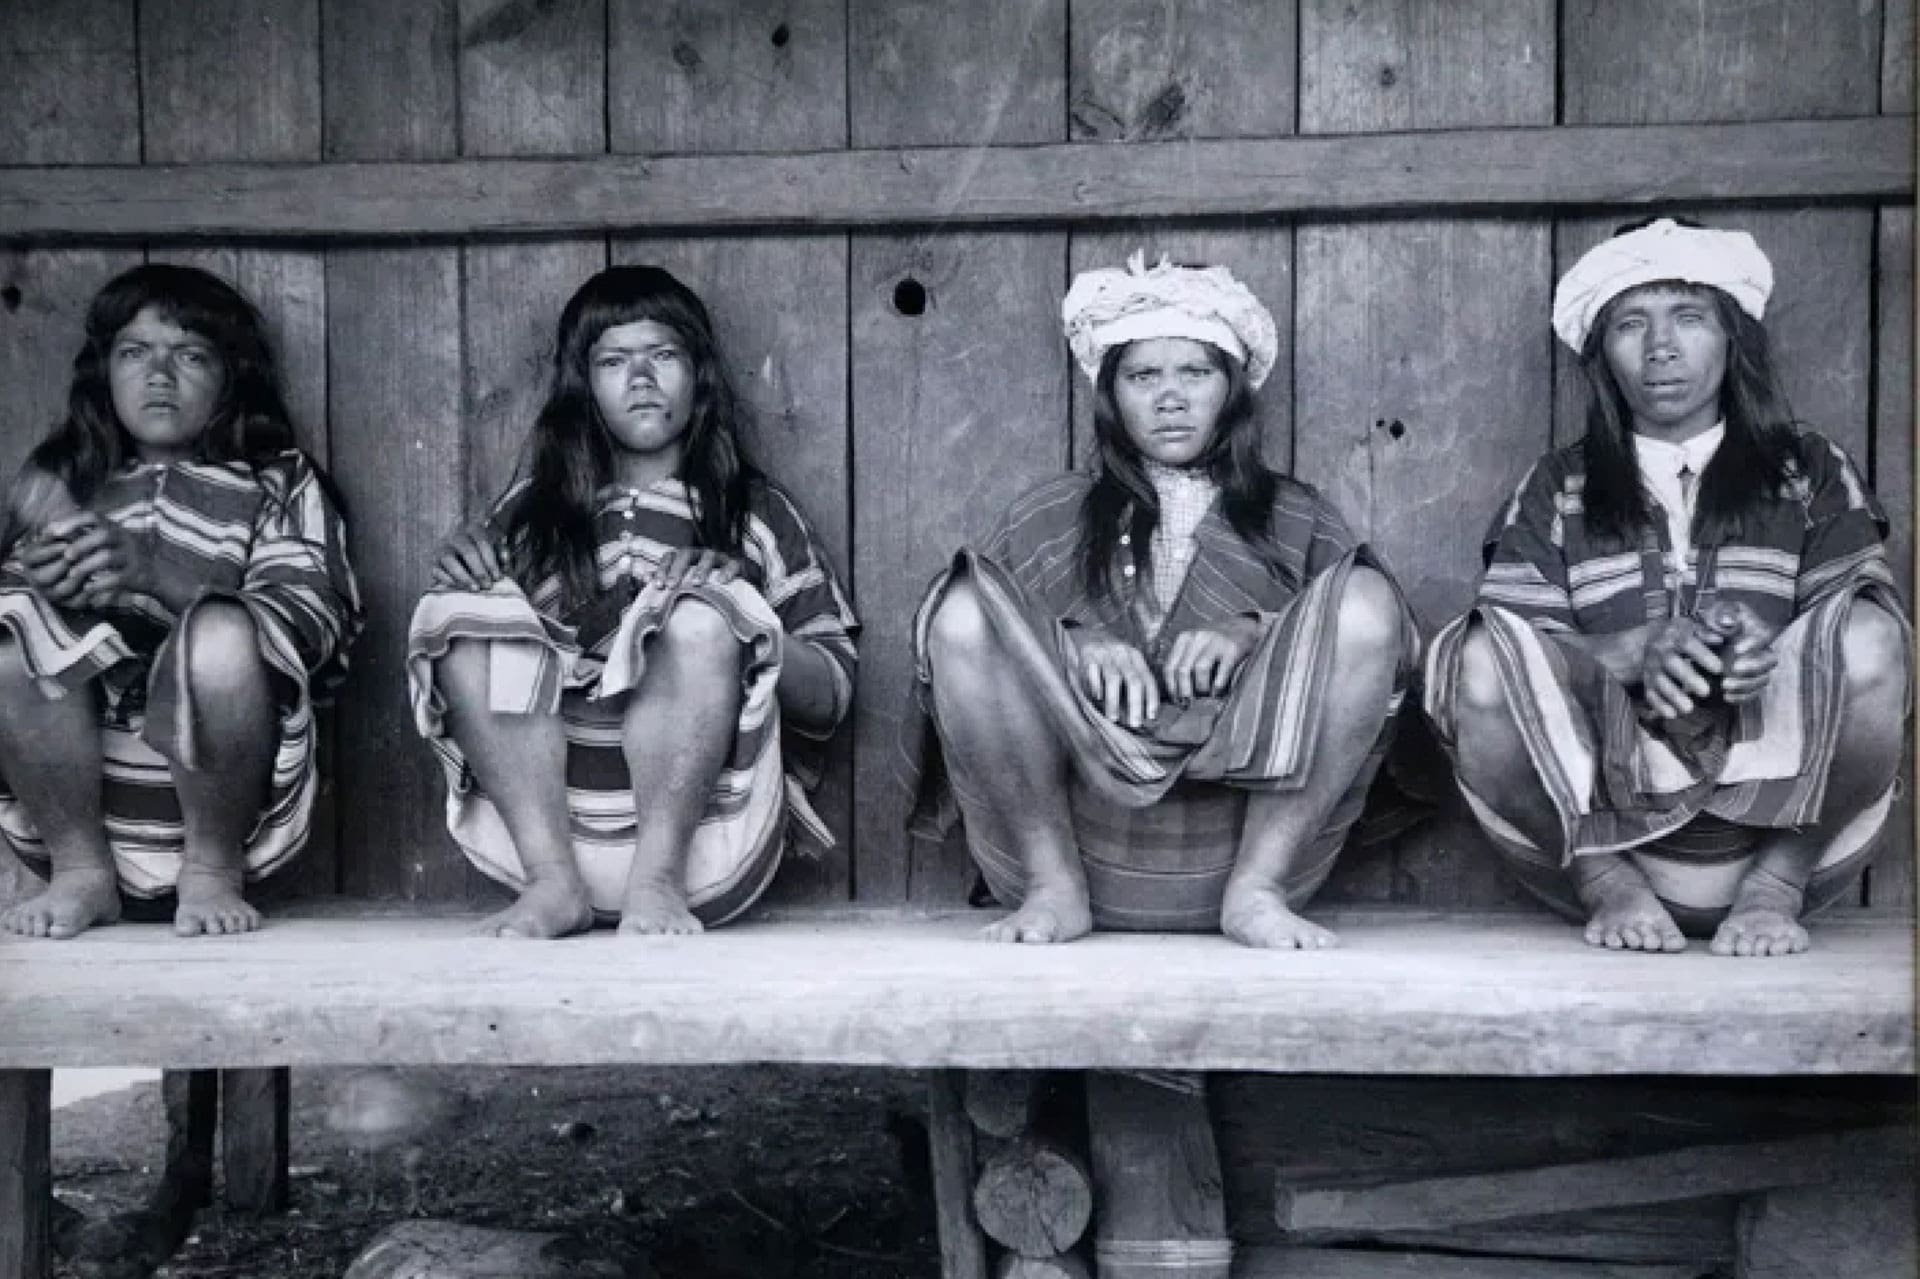 Four indigenous persons seated against a wooden wall.